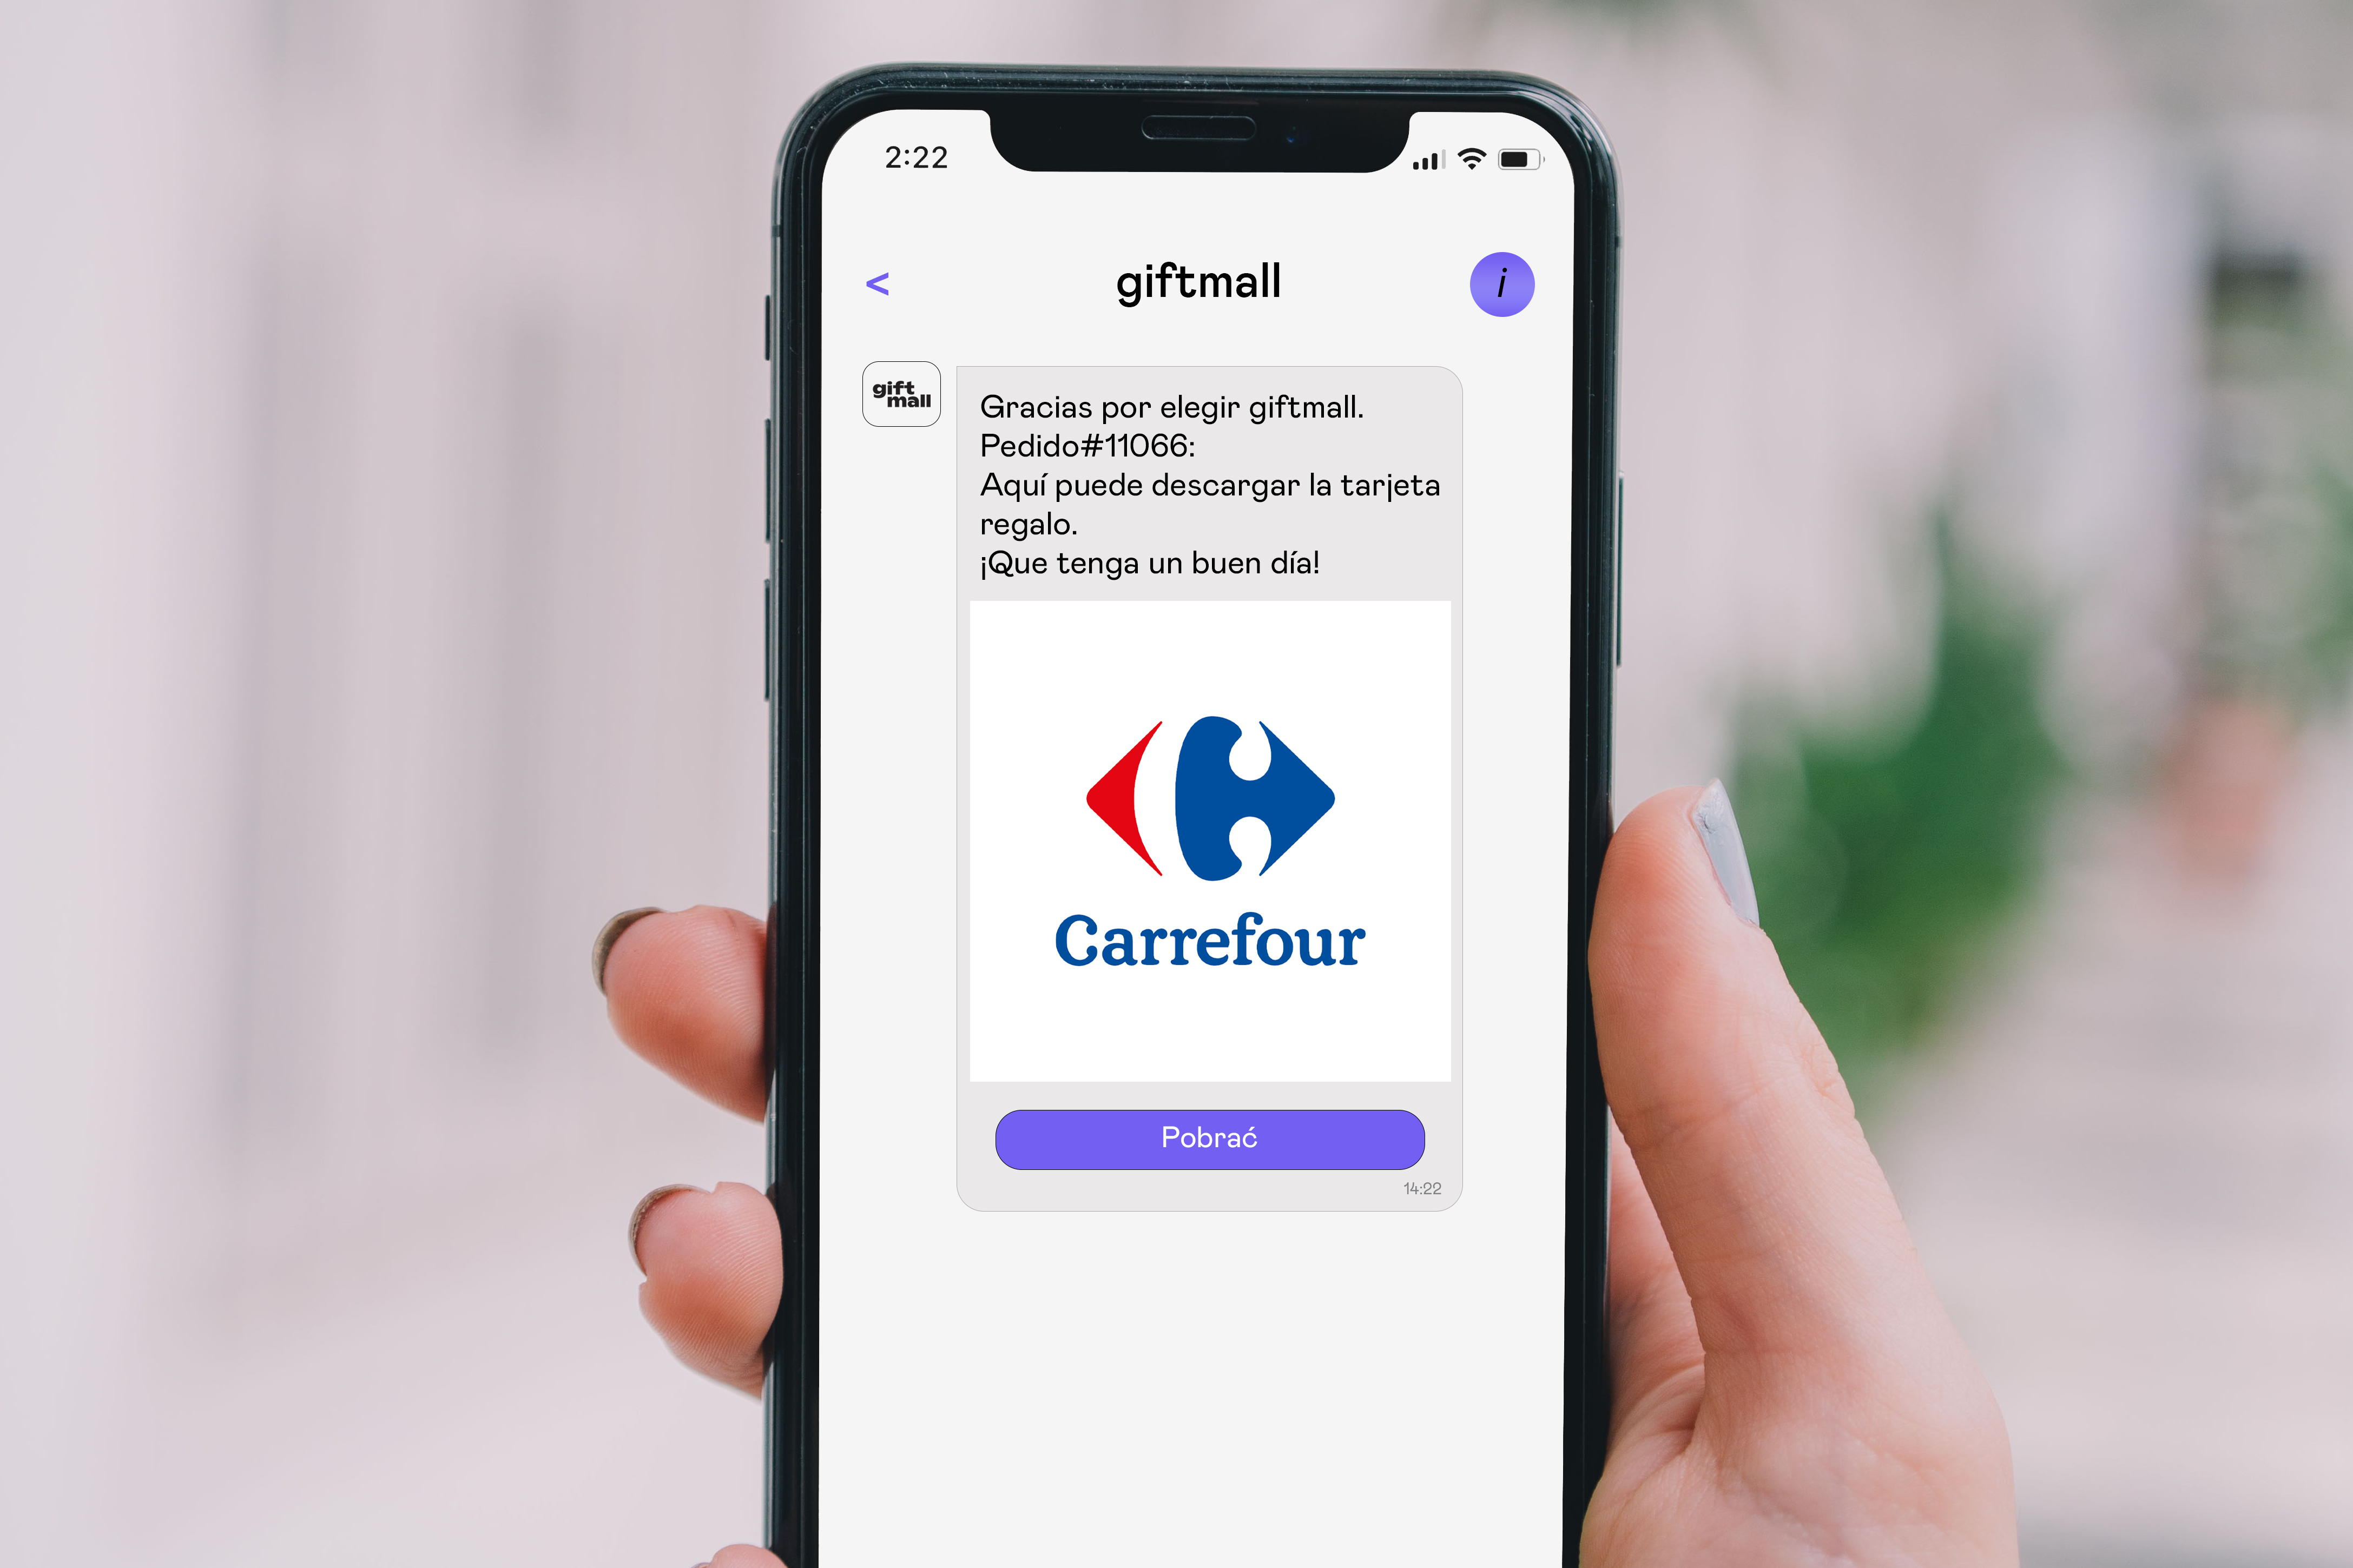 Gift Cards :: Carrefour Gift Card